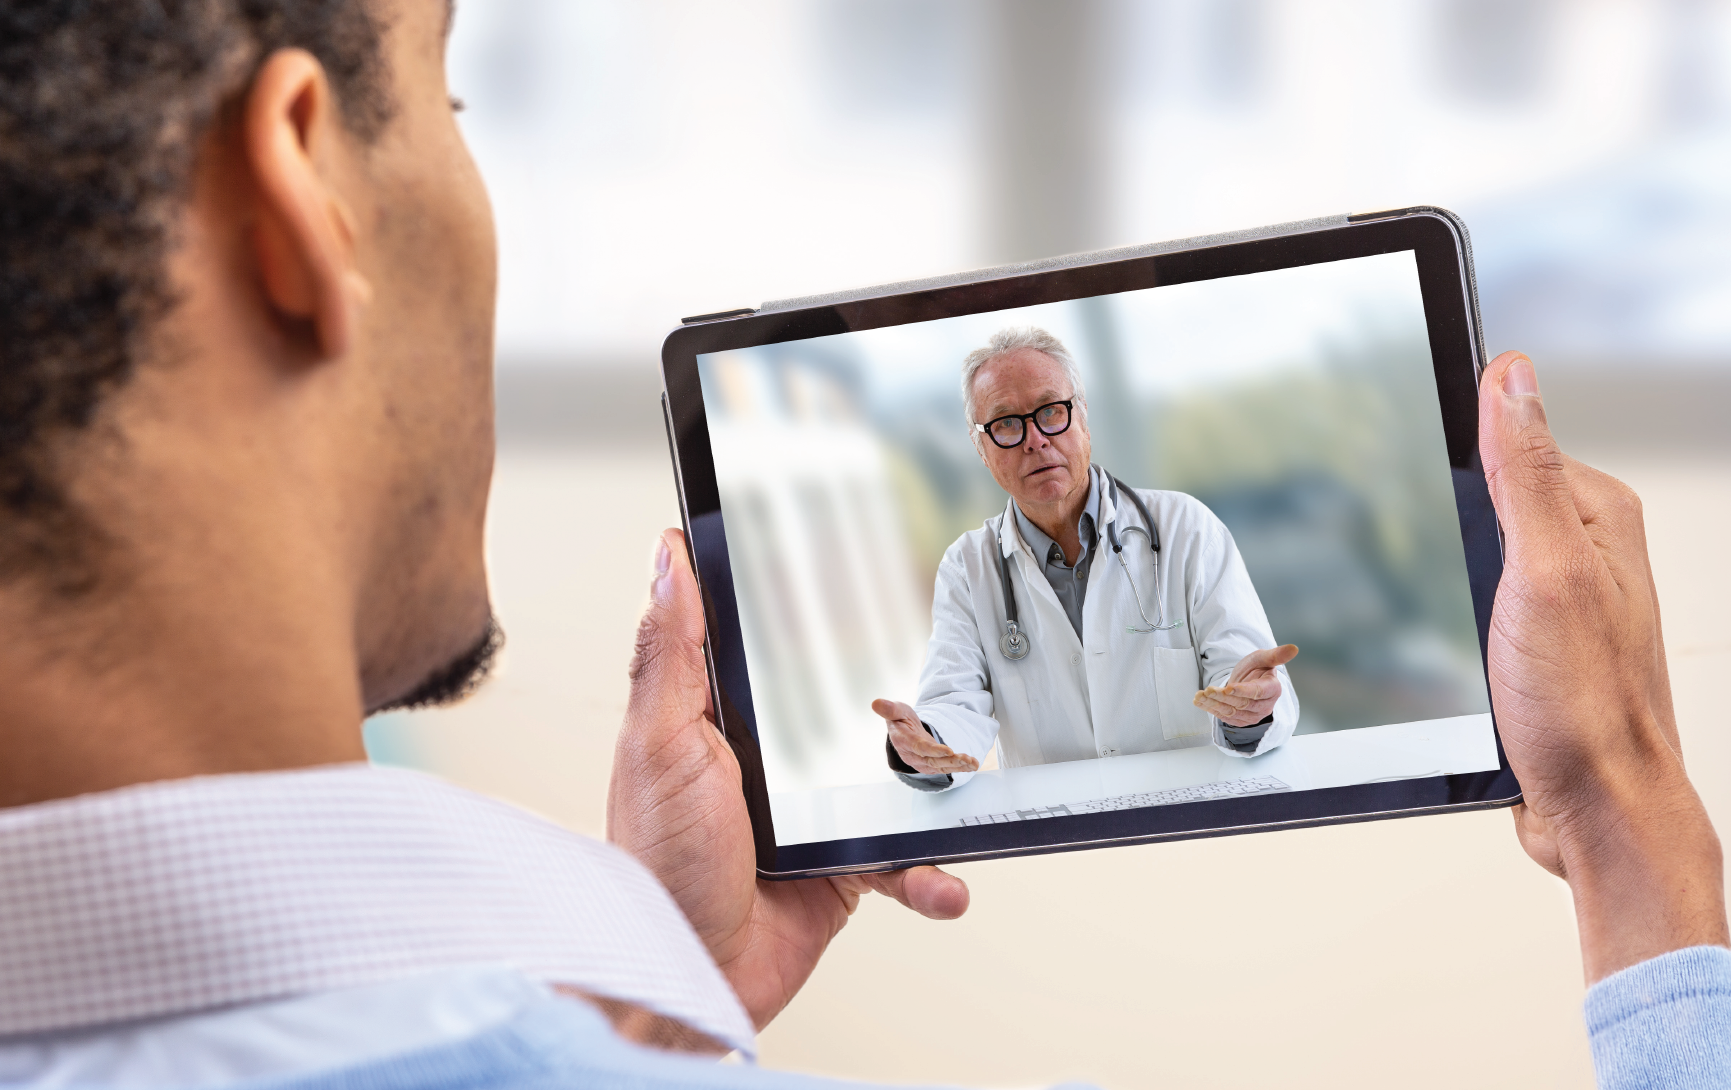 7 factors to consider before choosing a telehealth platform for social services